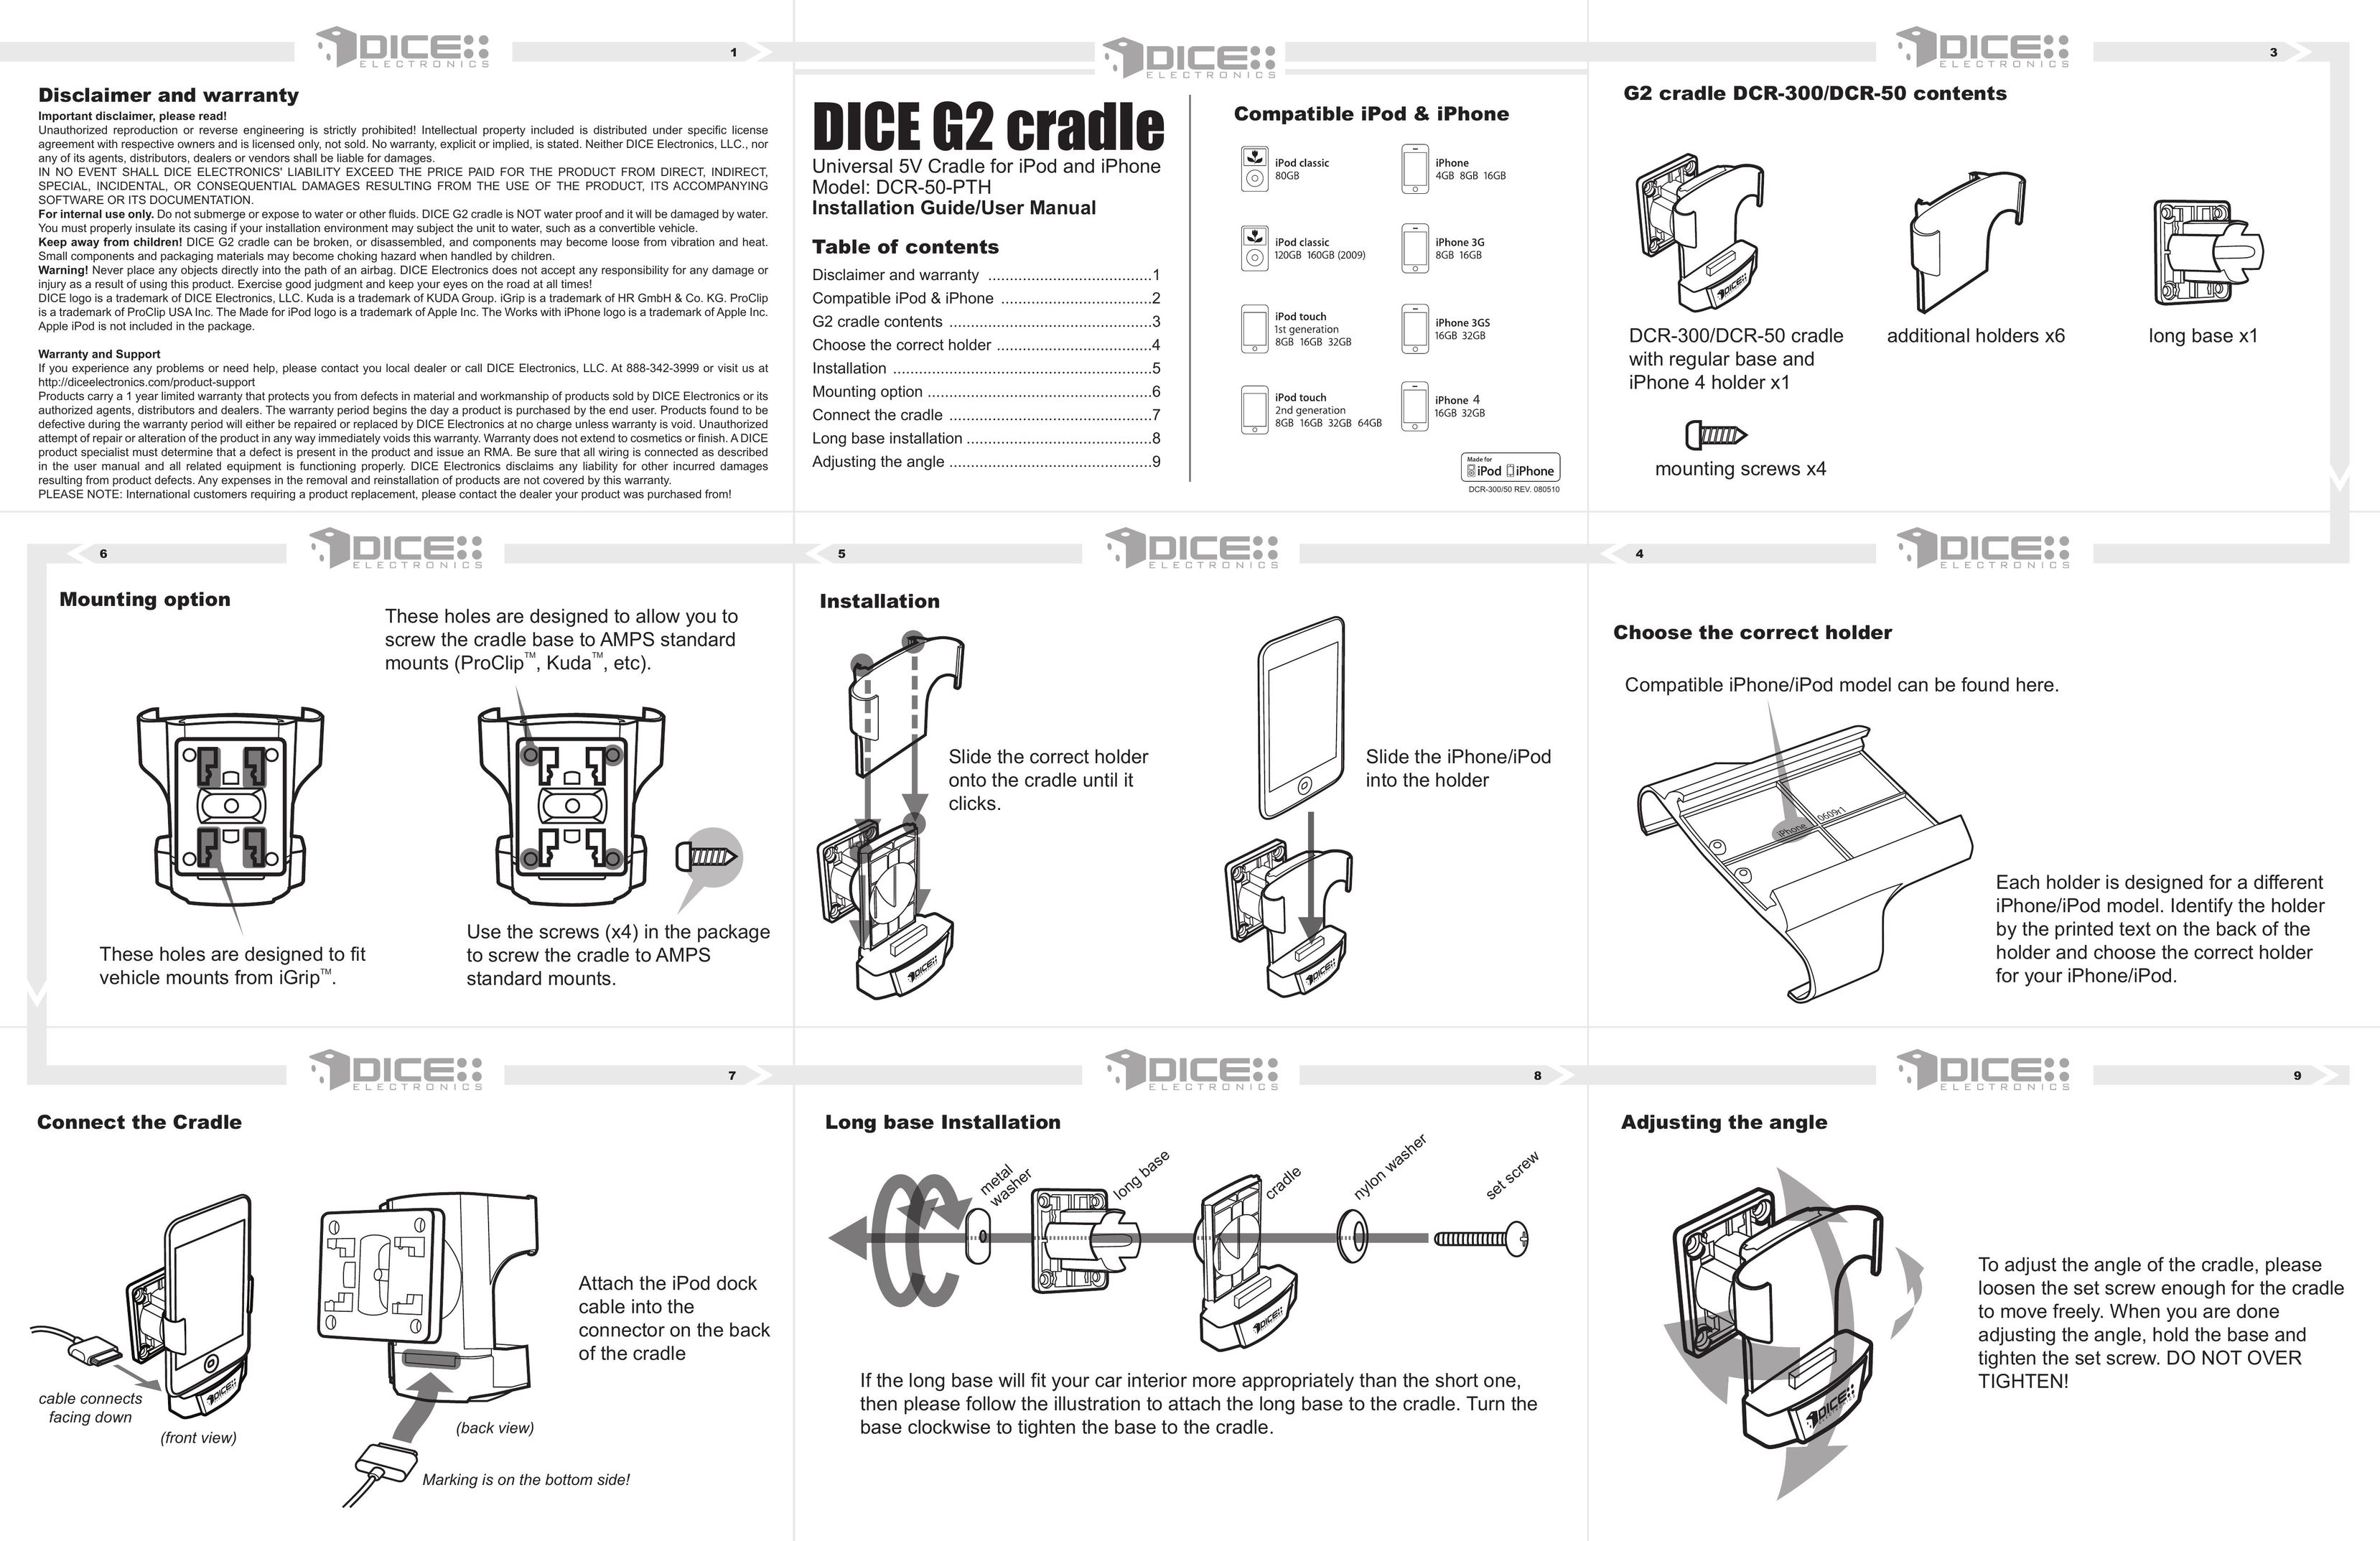 Dice electronic DCR-50 Carrying Case User Manual (Page 1)